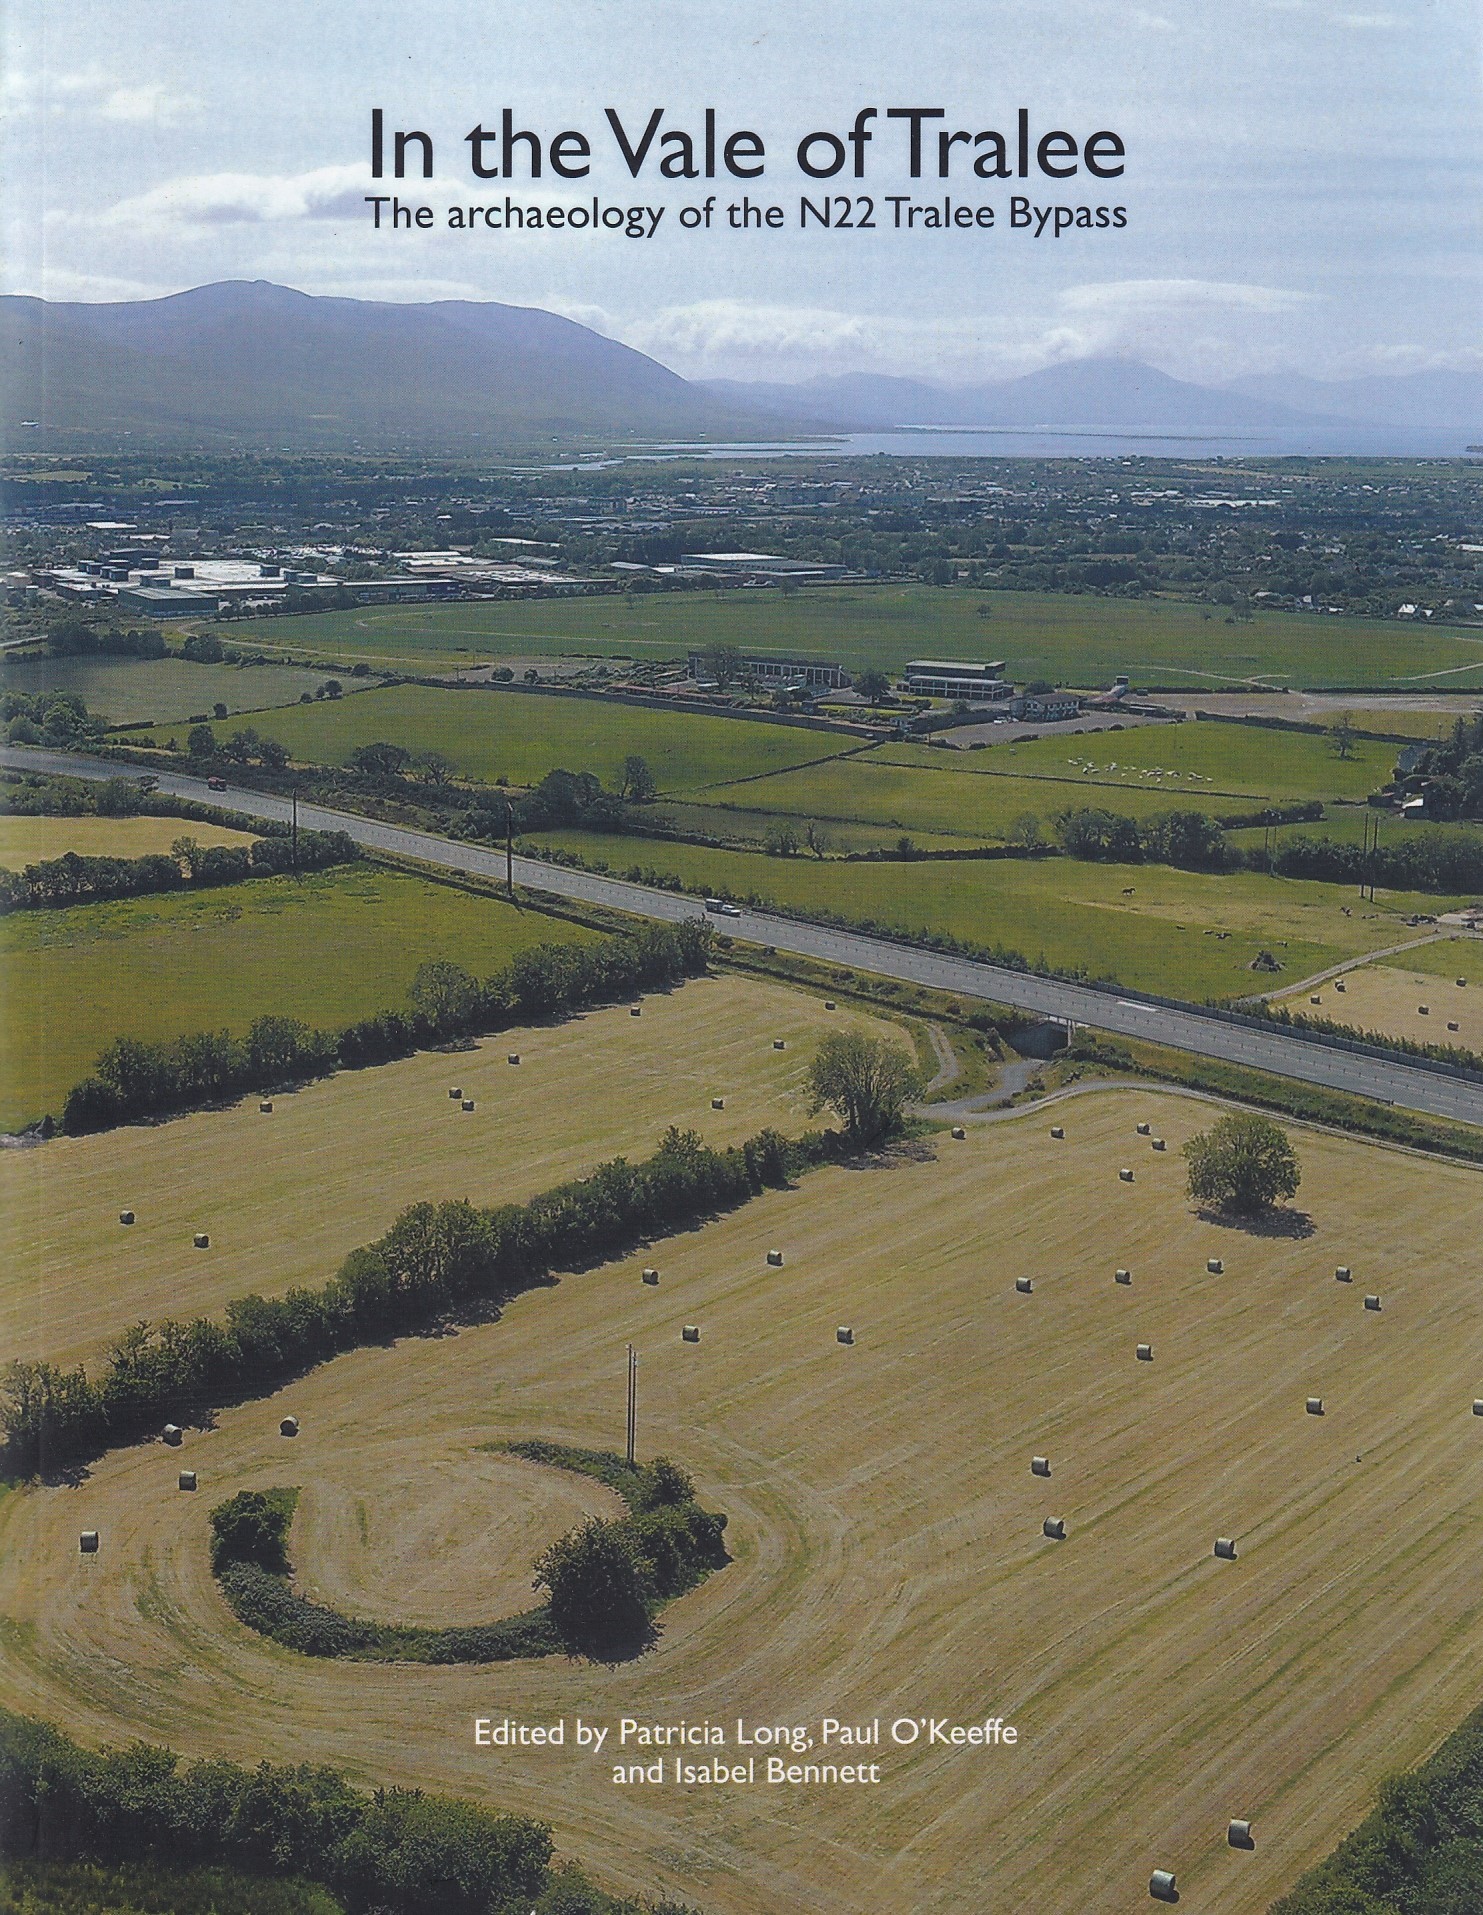 In the Vale of Tralee: The Archaeology of the N22 Tralee Bypass by Patricia Long, Paul O'Keeffe & Isabel Bennett (eds.)